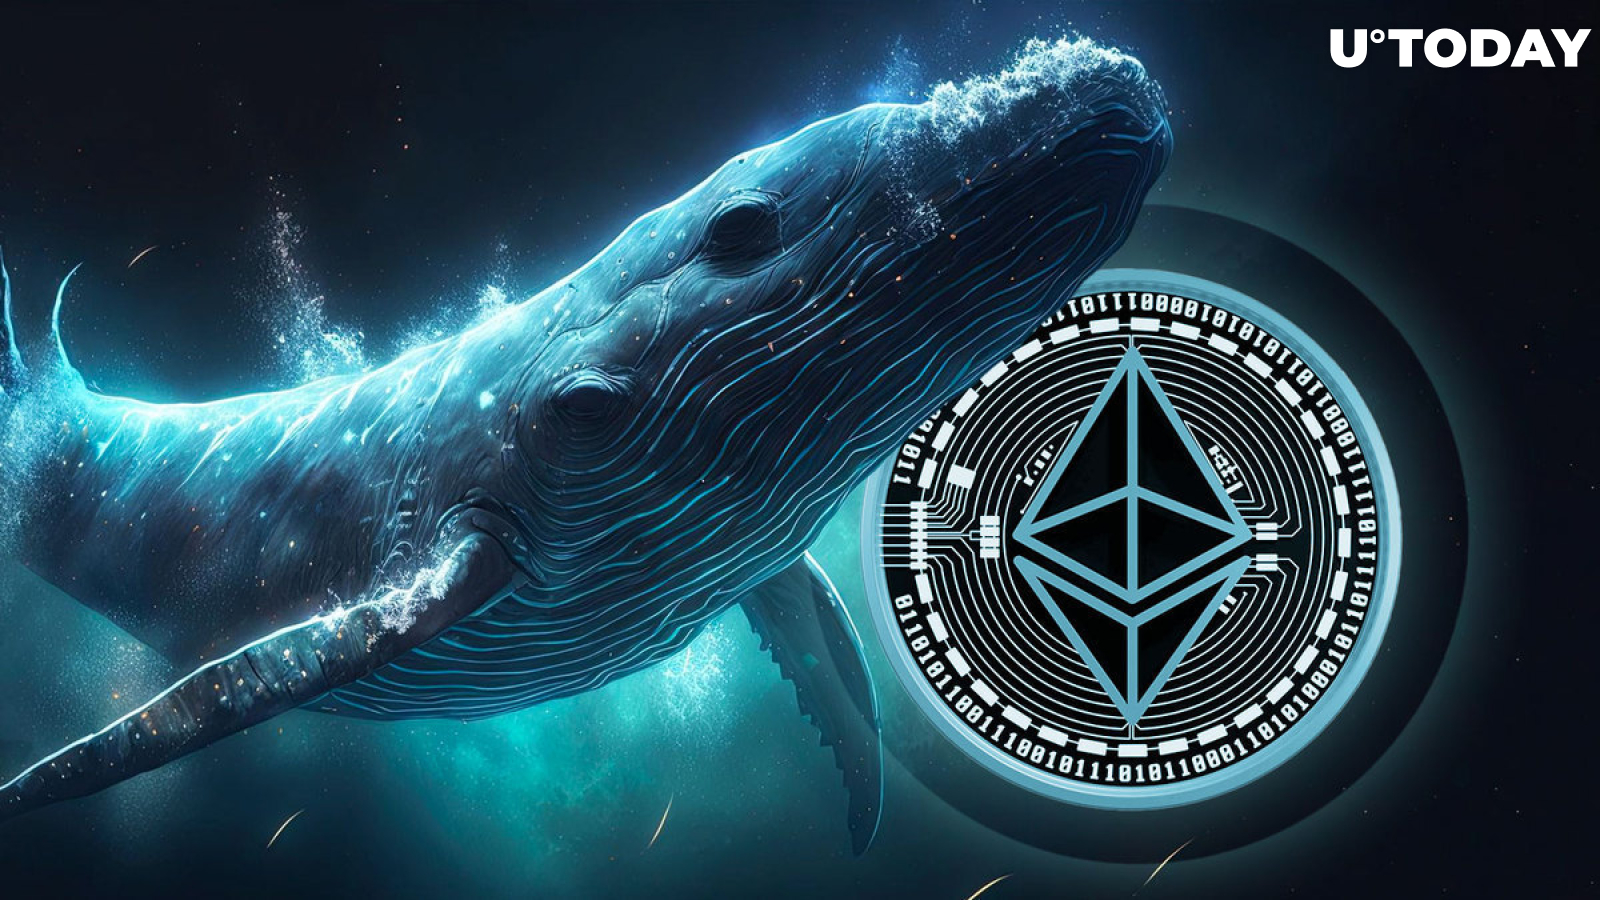 Gigantic ETH Whale Awakens From Dormancy, Shifts 10,000 ETH in One Fell Swoop